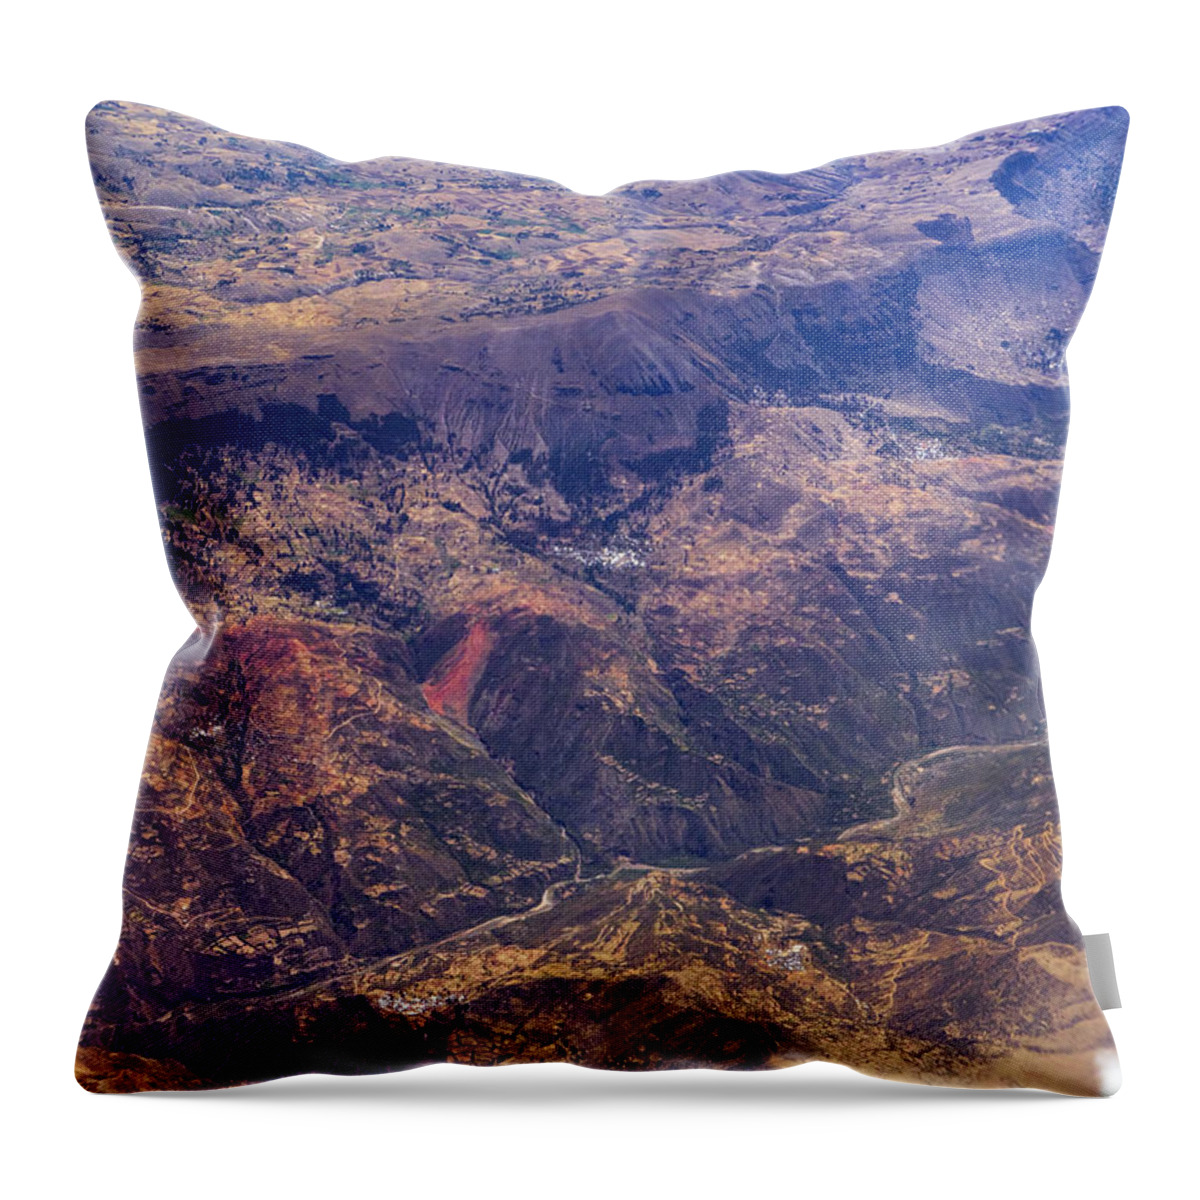 Peru Throw Pillow featuring the photograph The High Life by S Paul Sahm